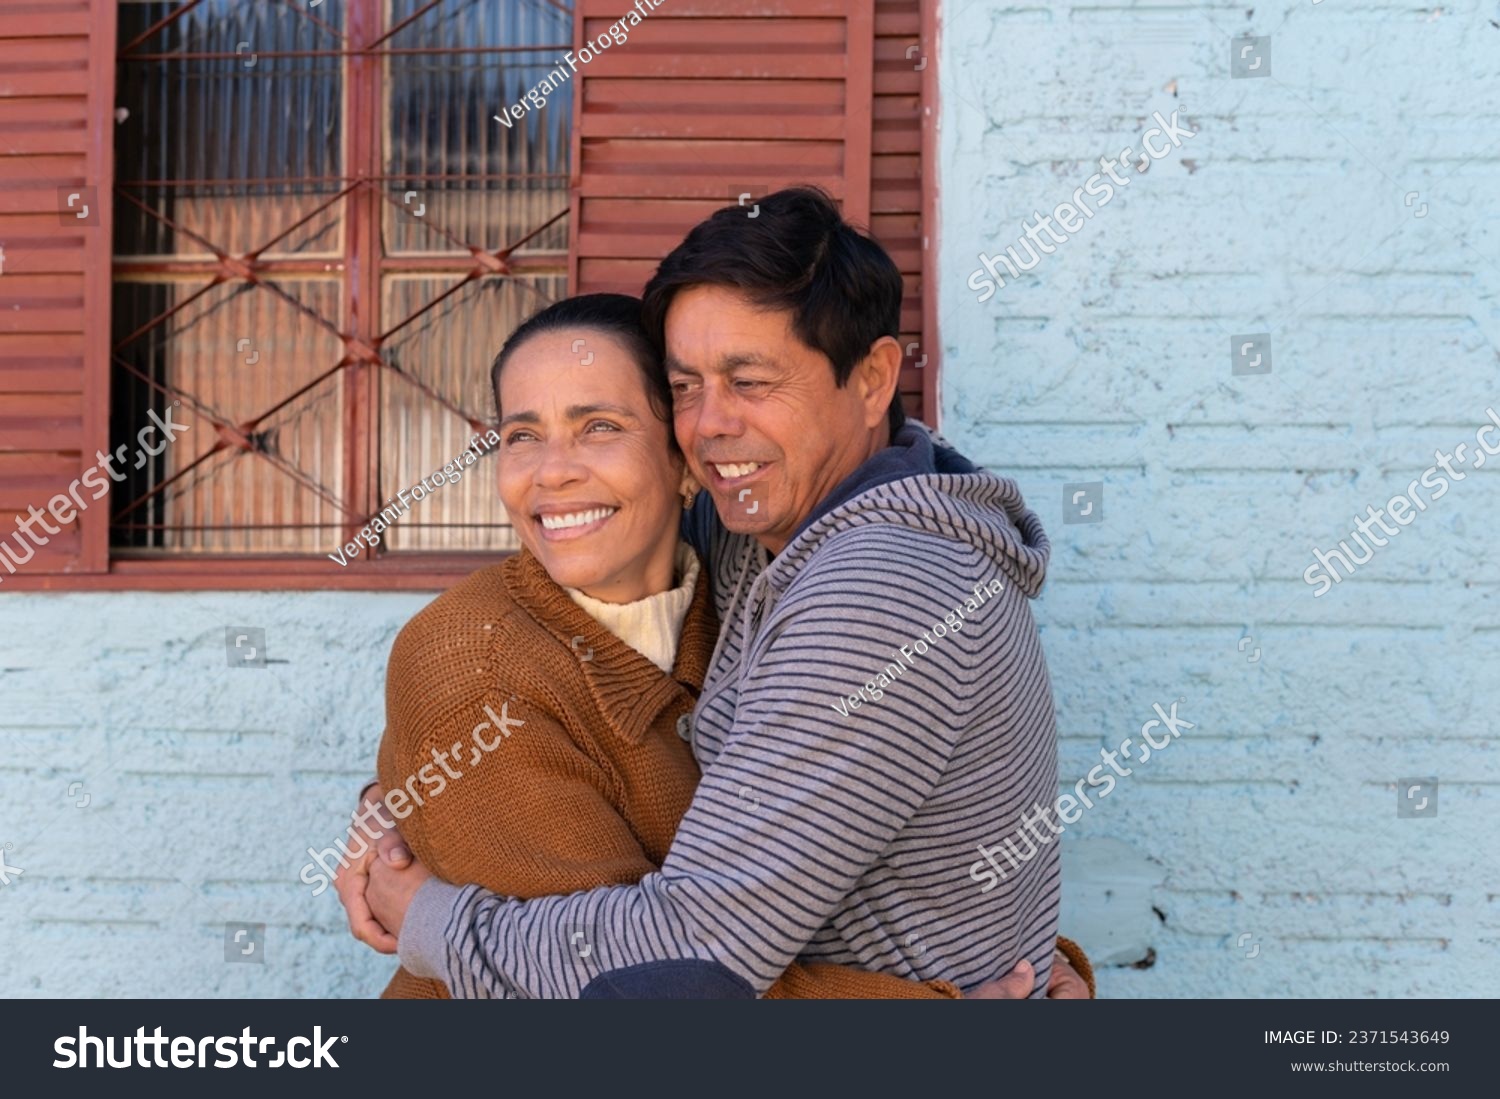 Cheerful Mature couplestanding and embracing each other outside the house. Togetherness, multi-generation family, support concept. #2371543649